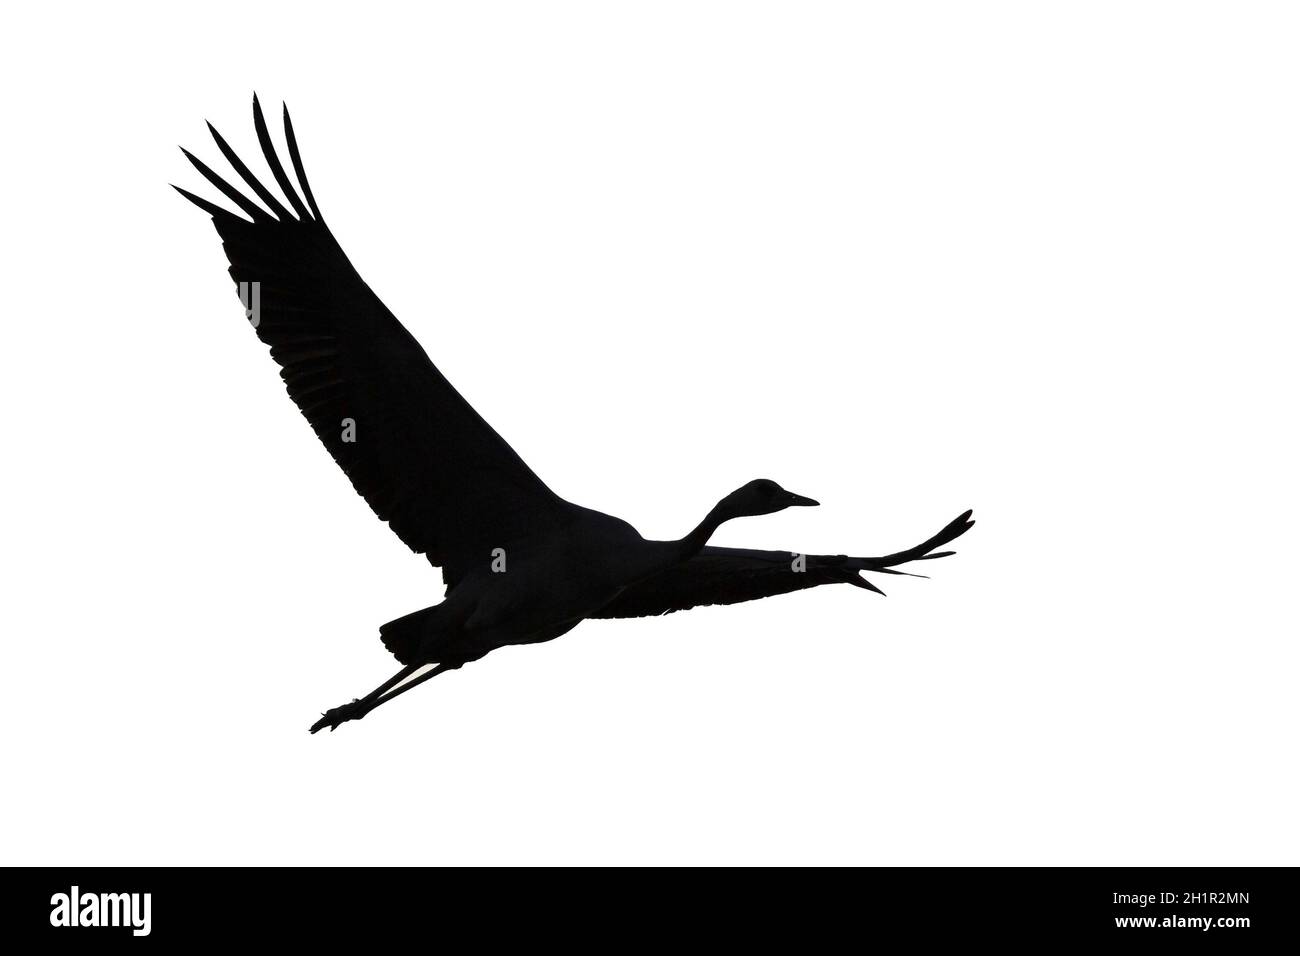 Silhouette of a Common Crane (Eurasian Crane) in flight. Cut out on white background. Stock Photo